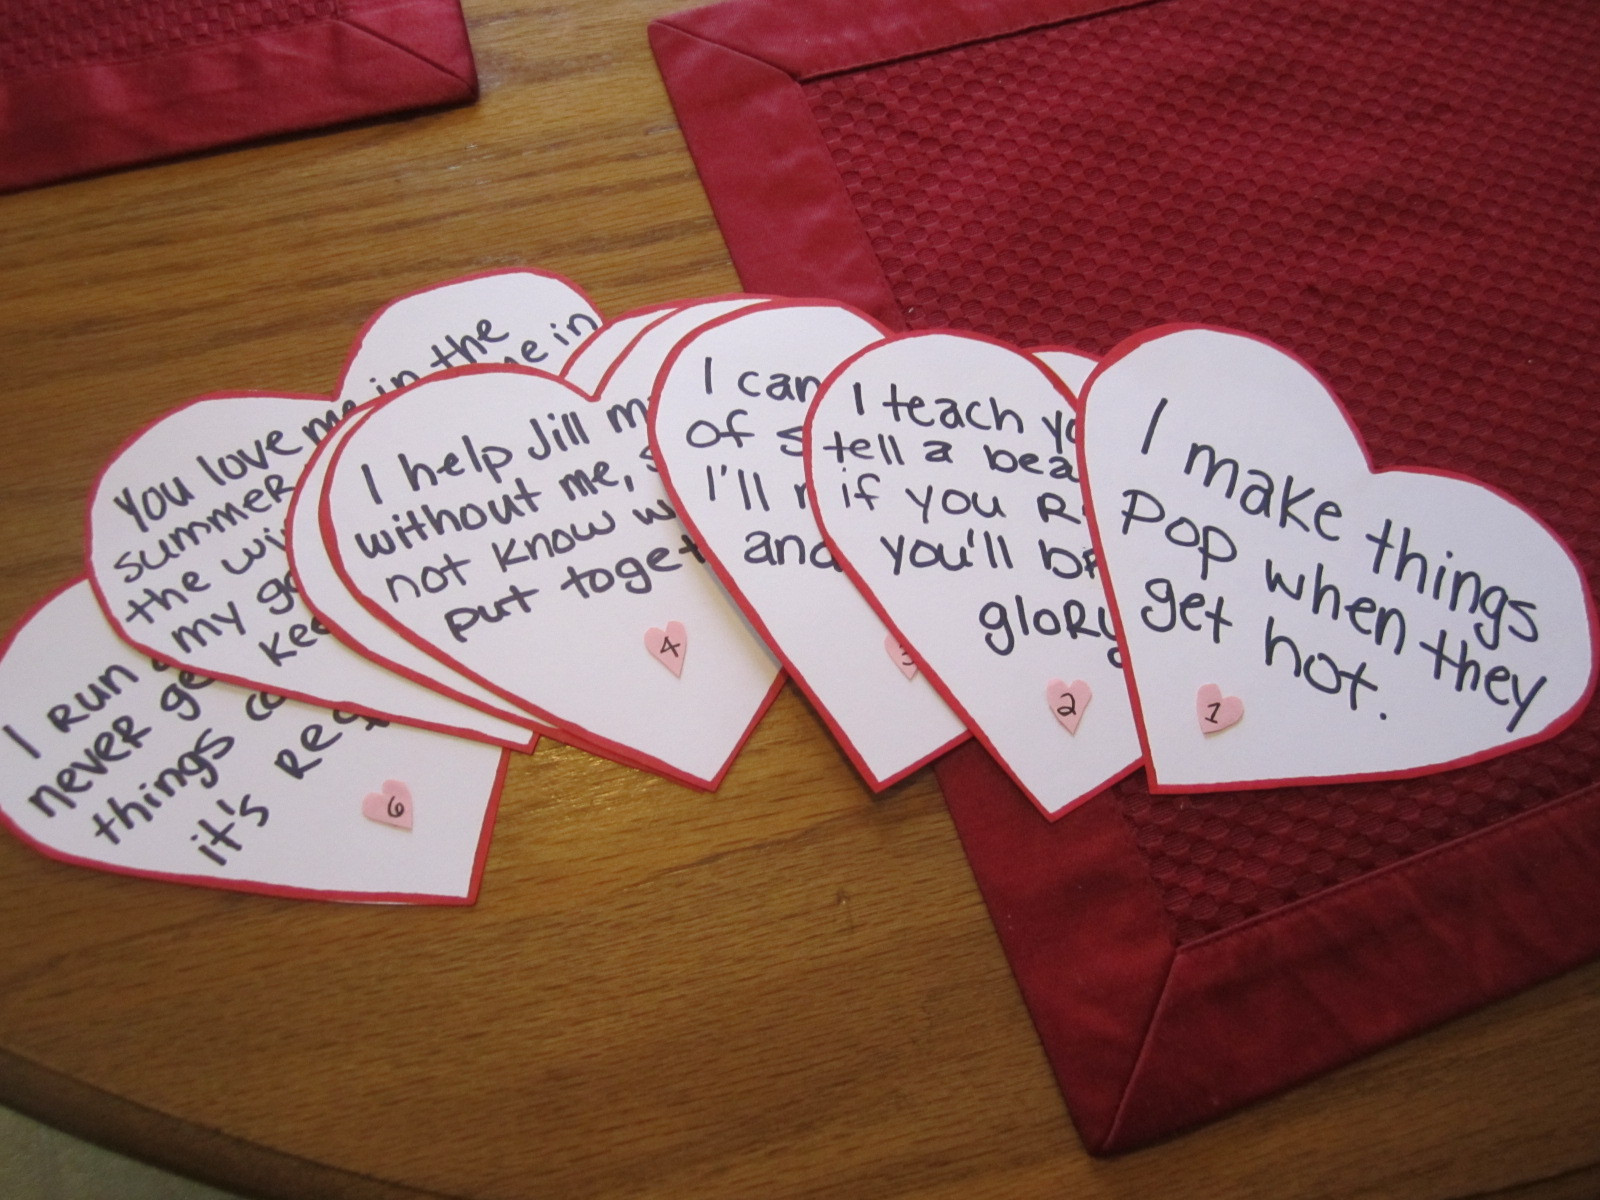 Creative Valentines Day Gift Ideas
 Ten DIY Valentine’s Day Gifts for him and her